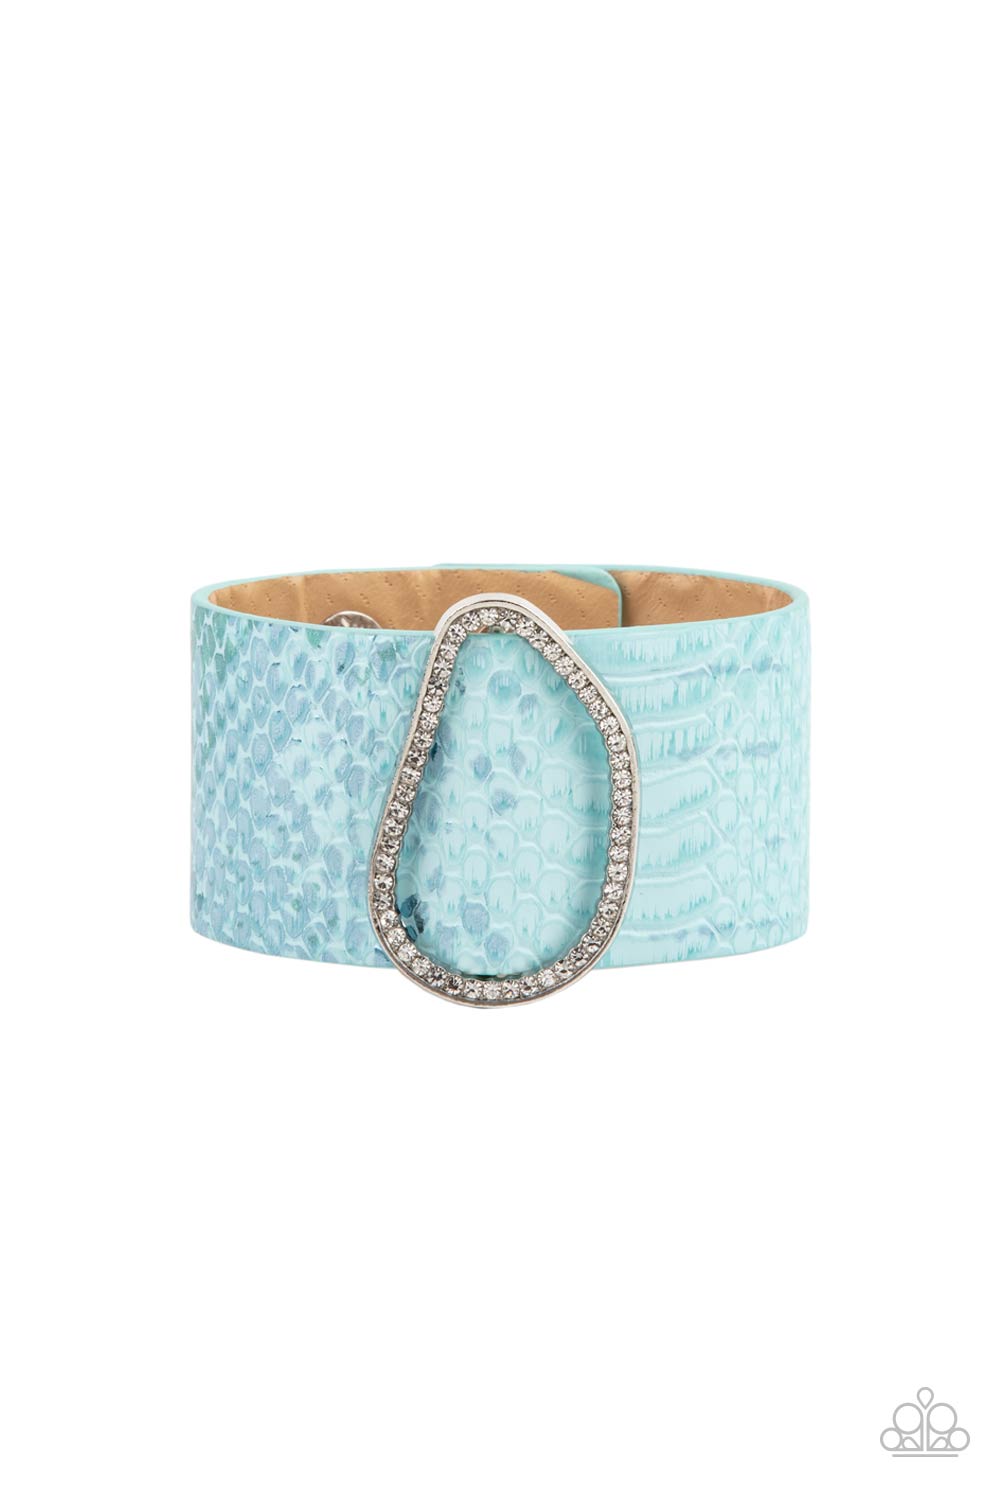 Paparazzi Accessories HISS-tory In The Making - Blue Wrap Bracelets - Lady T Accessories